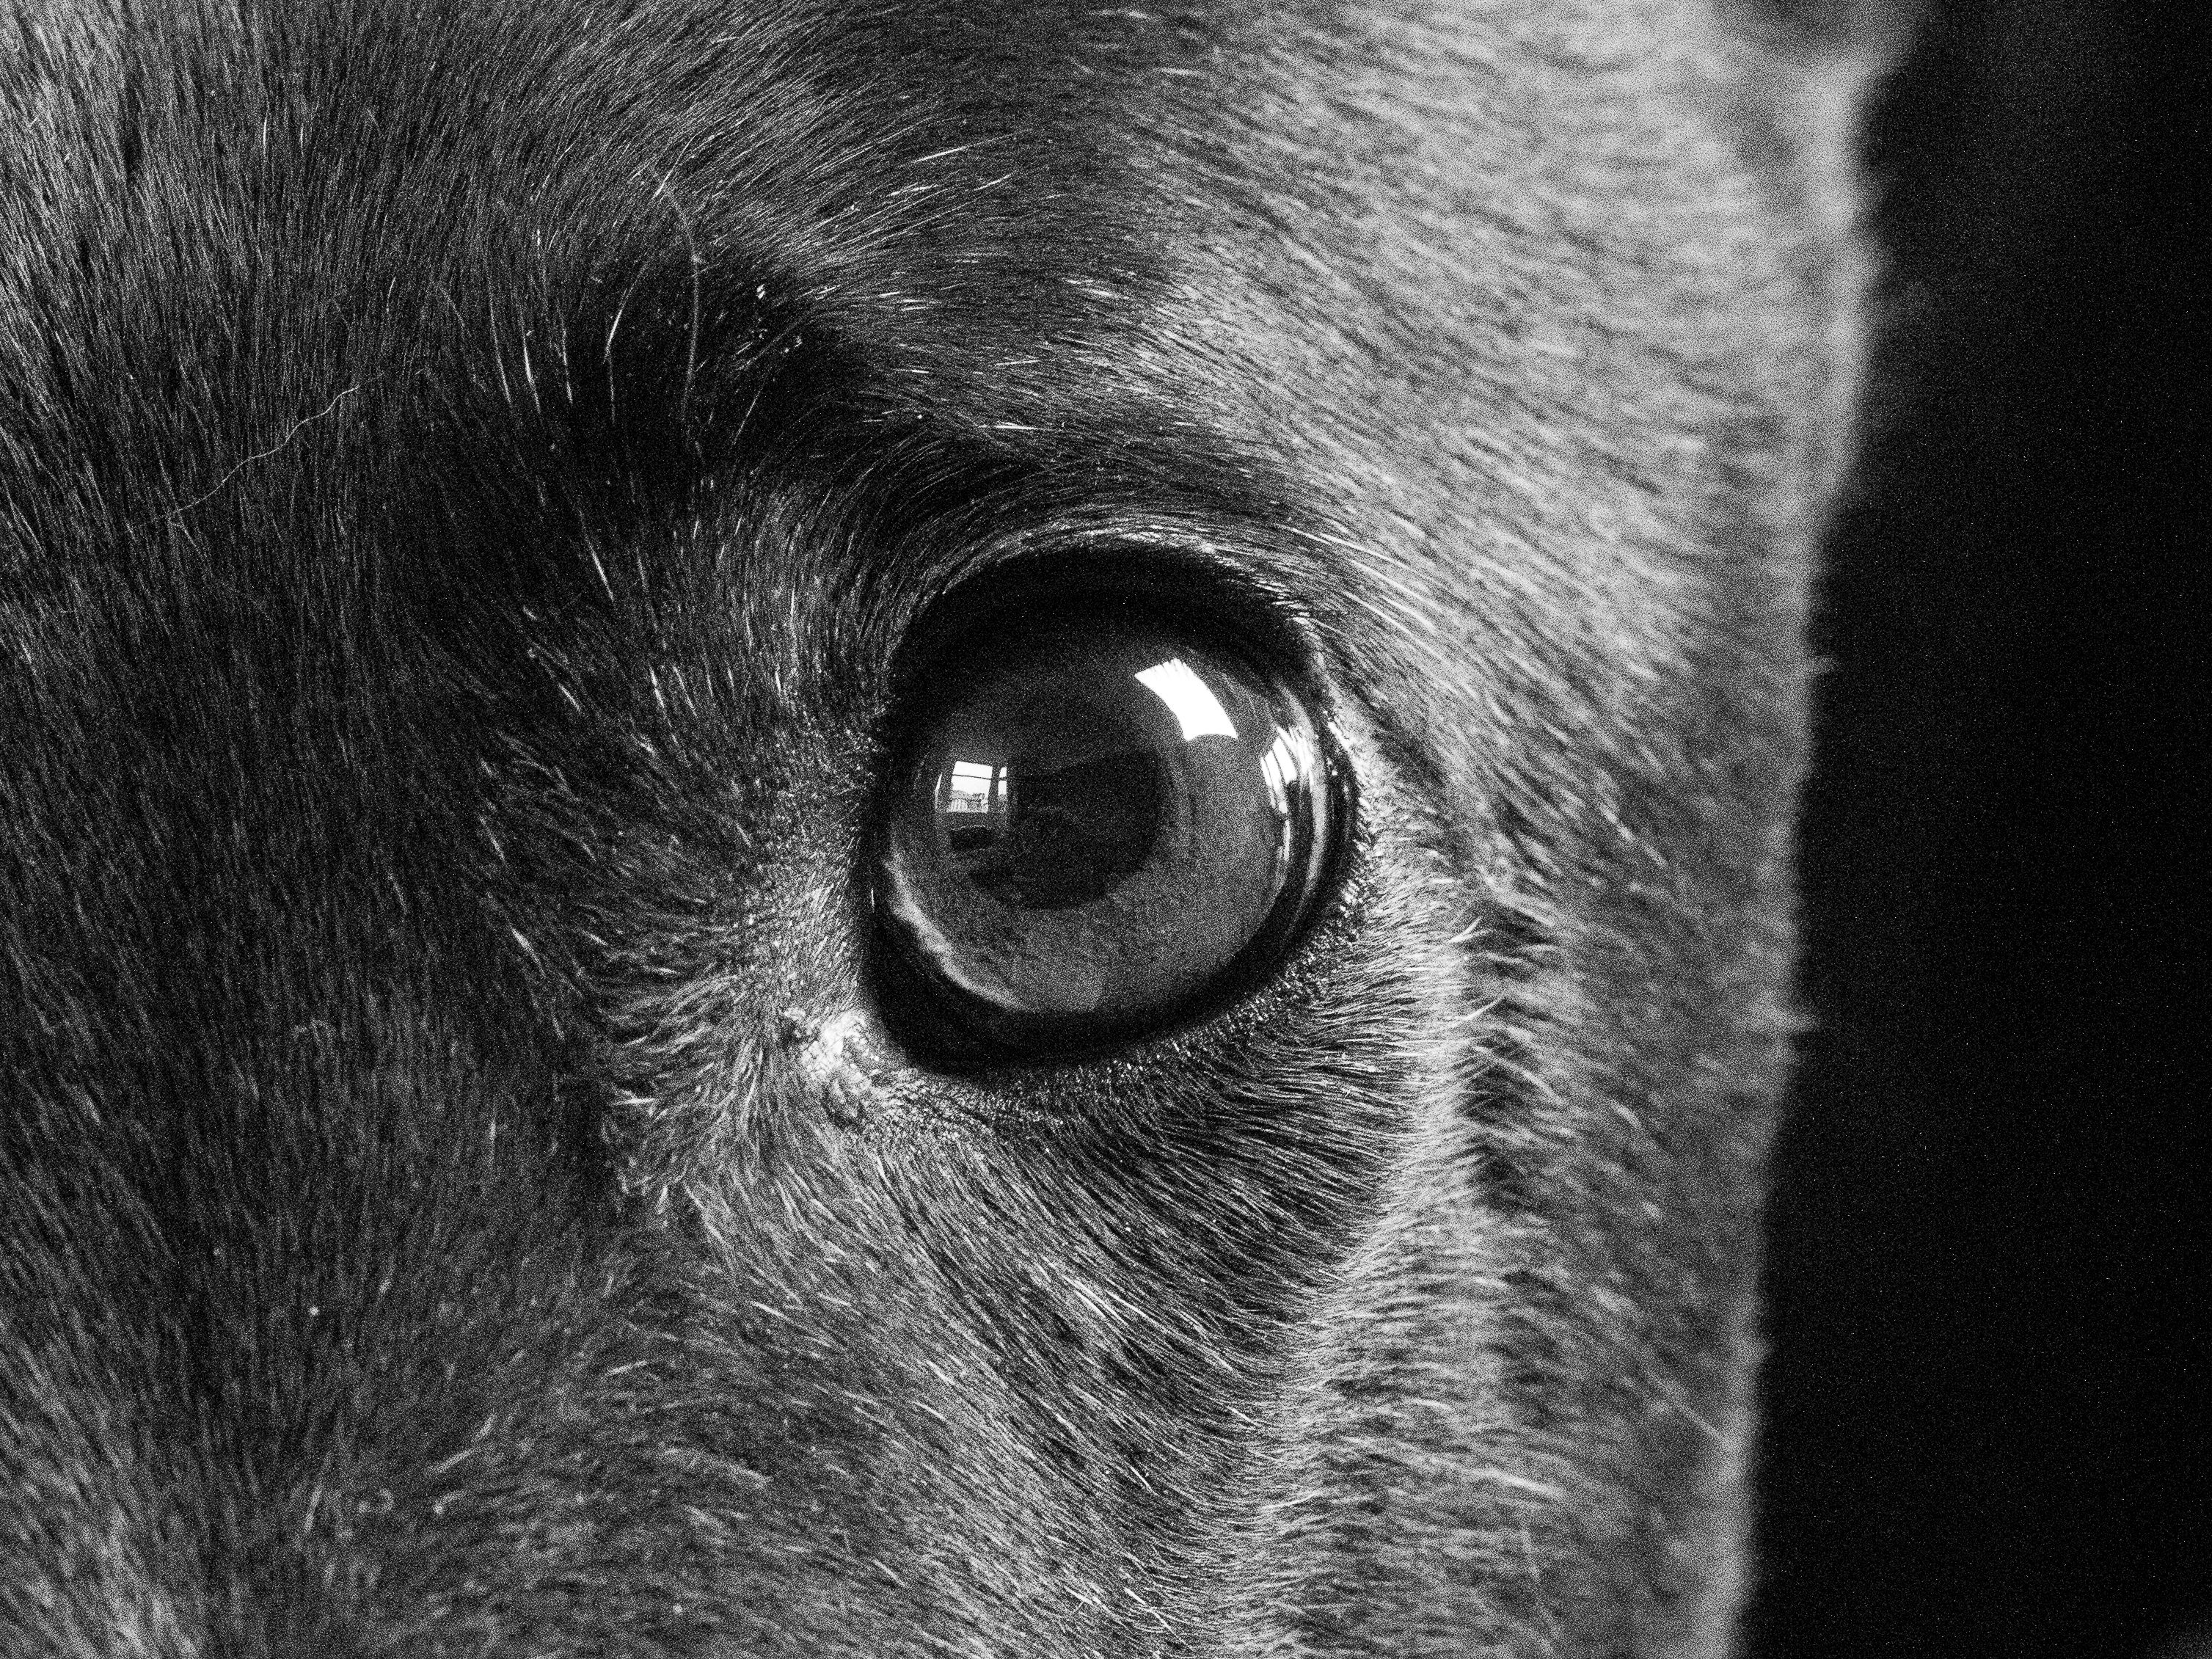 A black and white image of a greyhound, cropped into her eye.